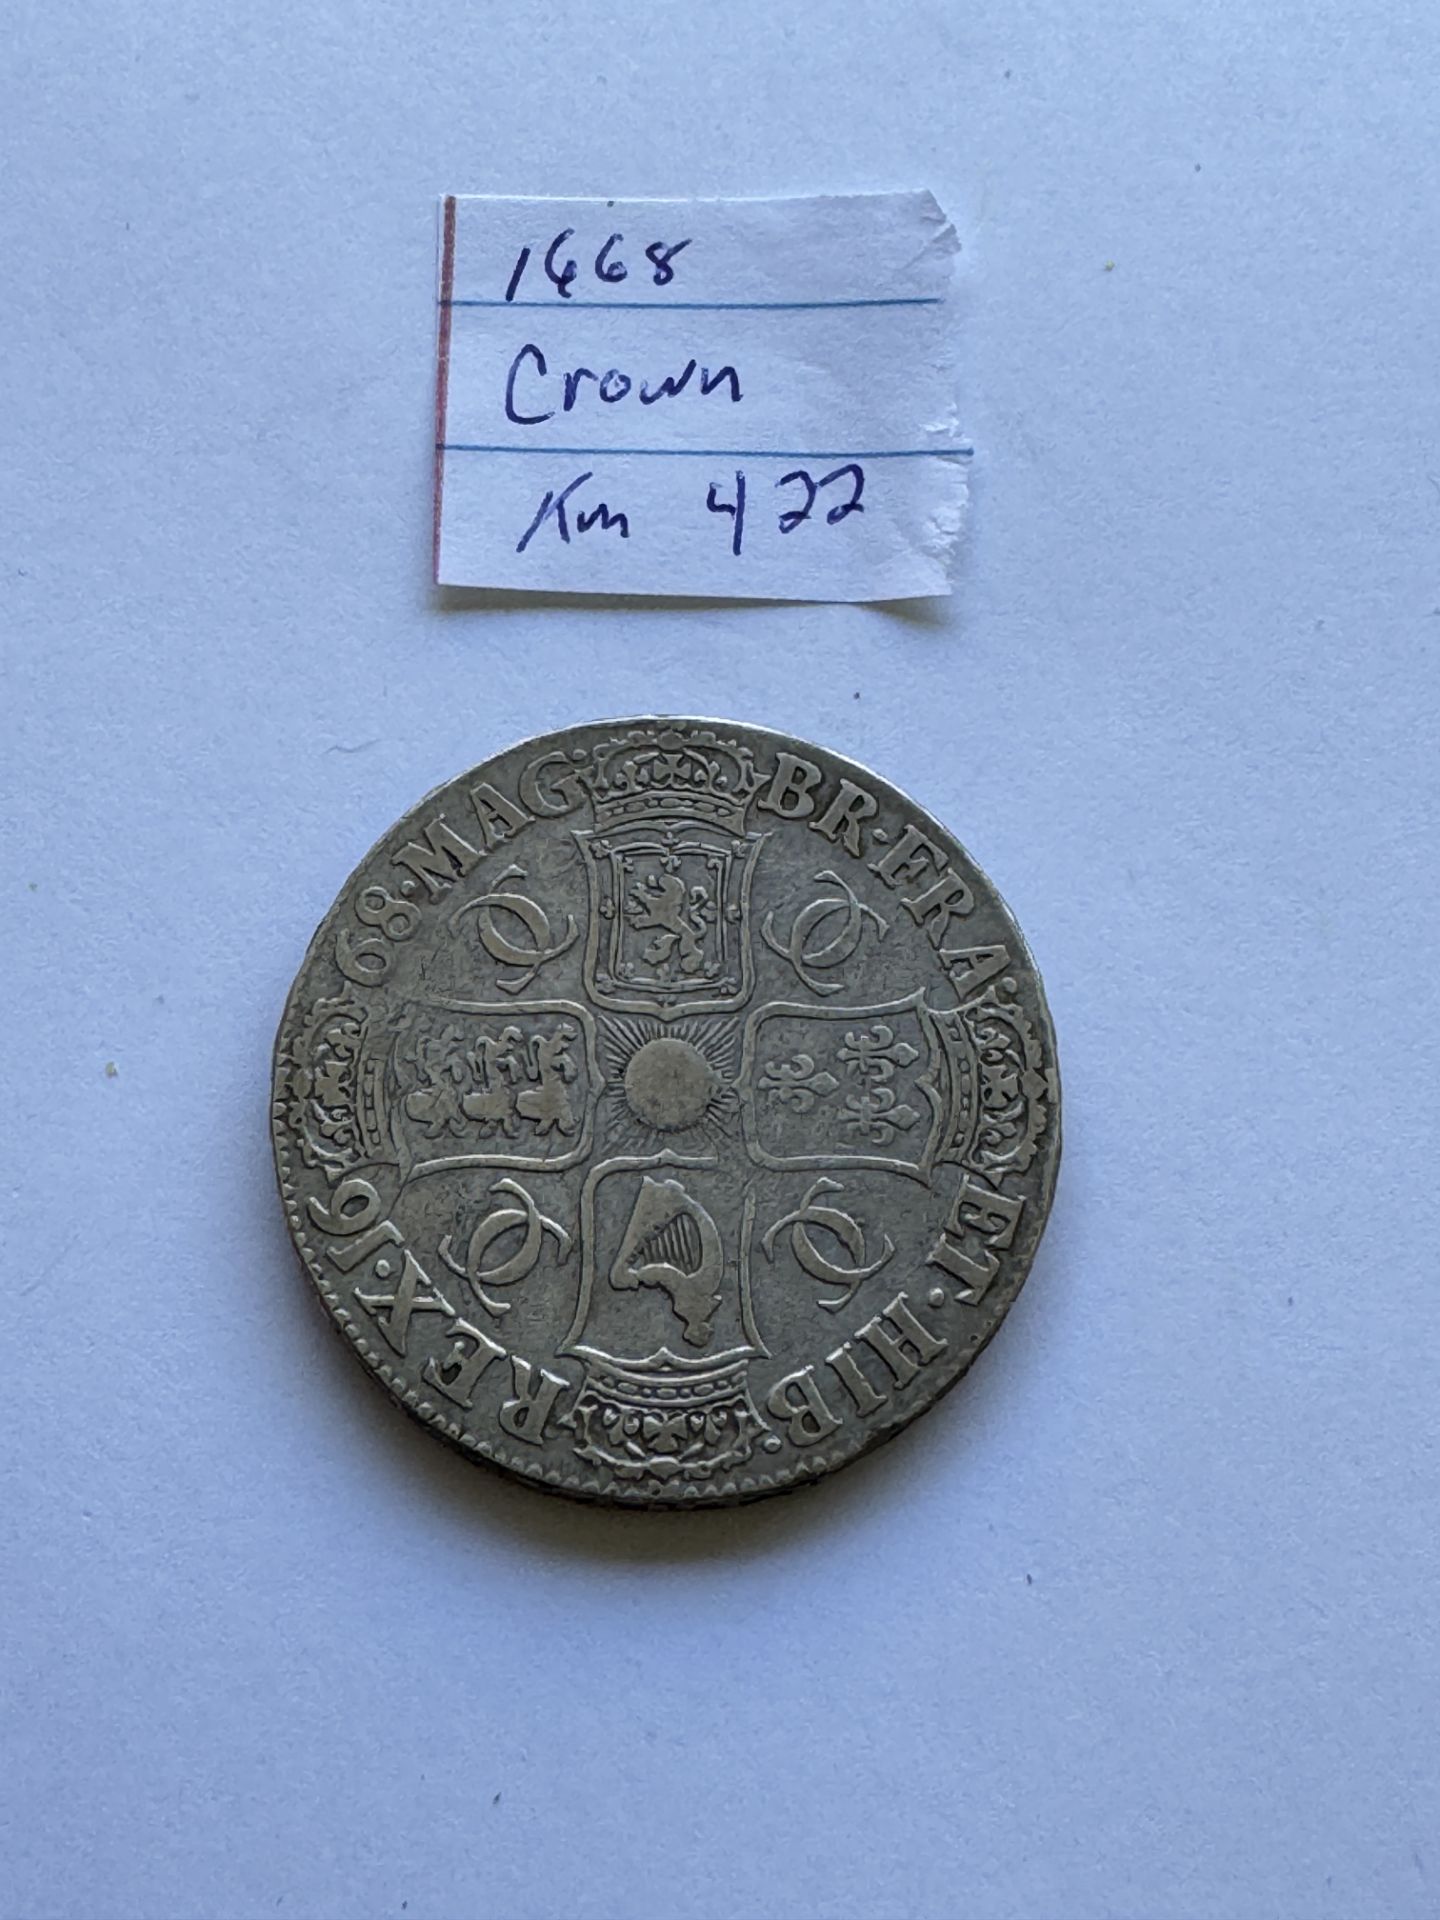 1668 CHARLES II CROWN COIN - Image 2 of 2